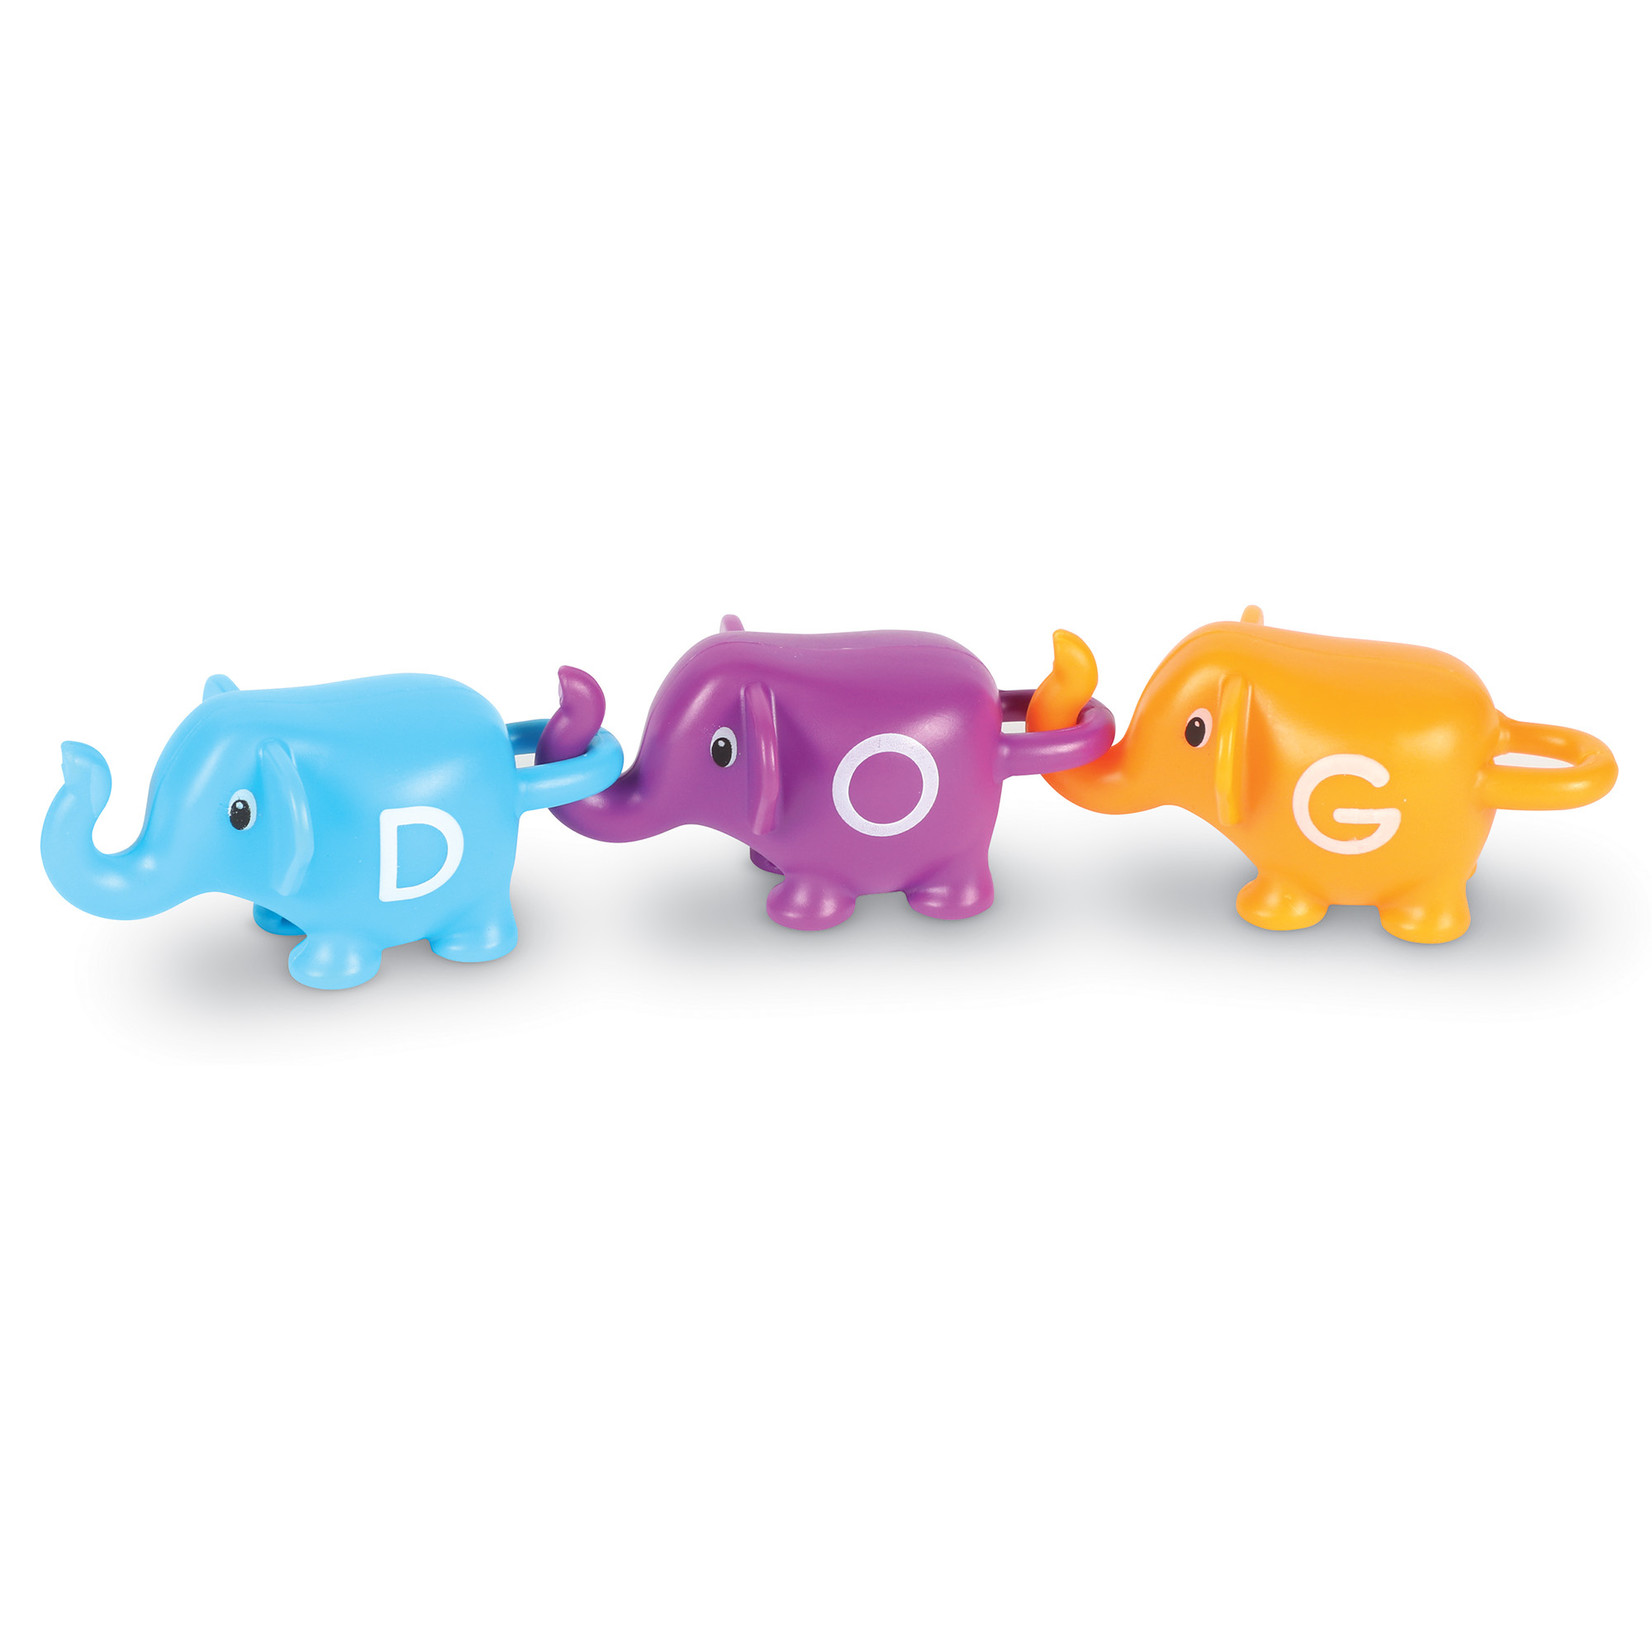 ABC Elephants by Learning Resources 